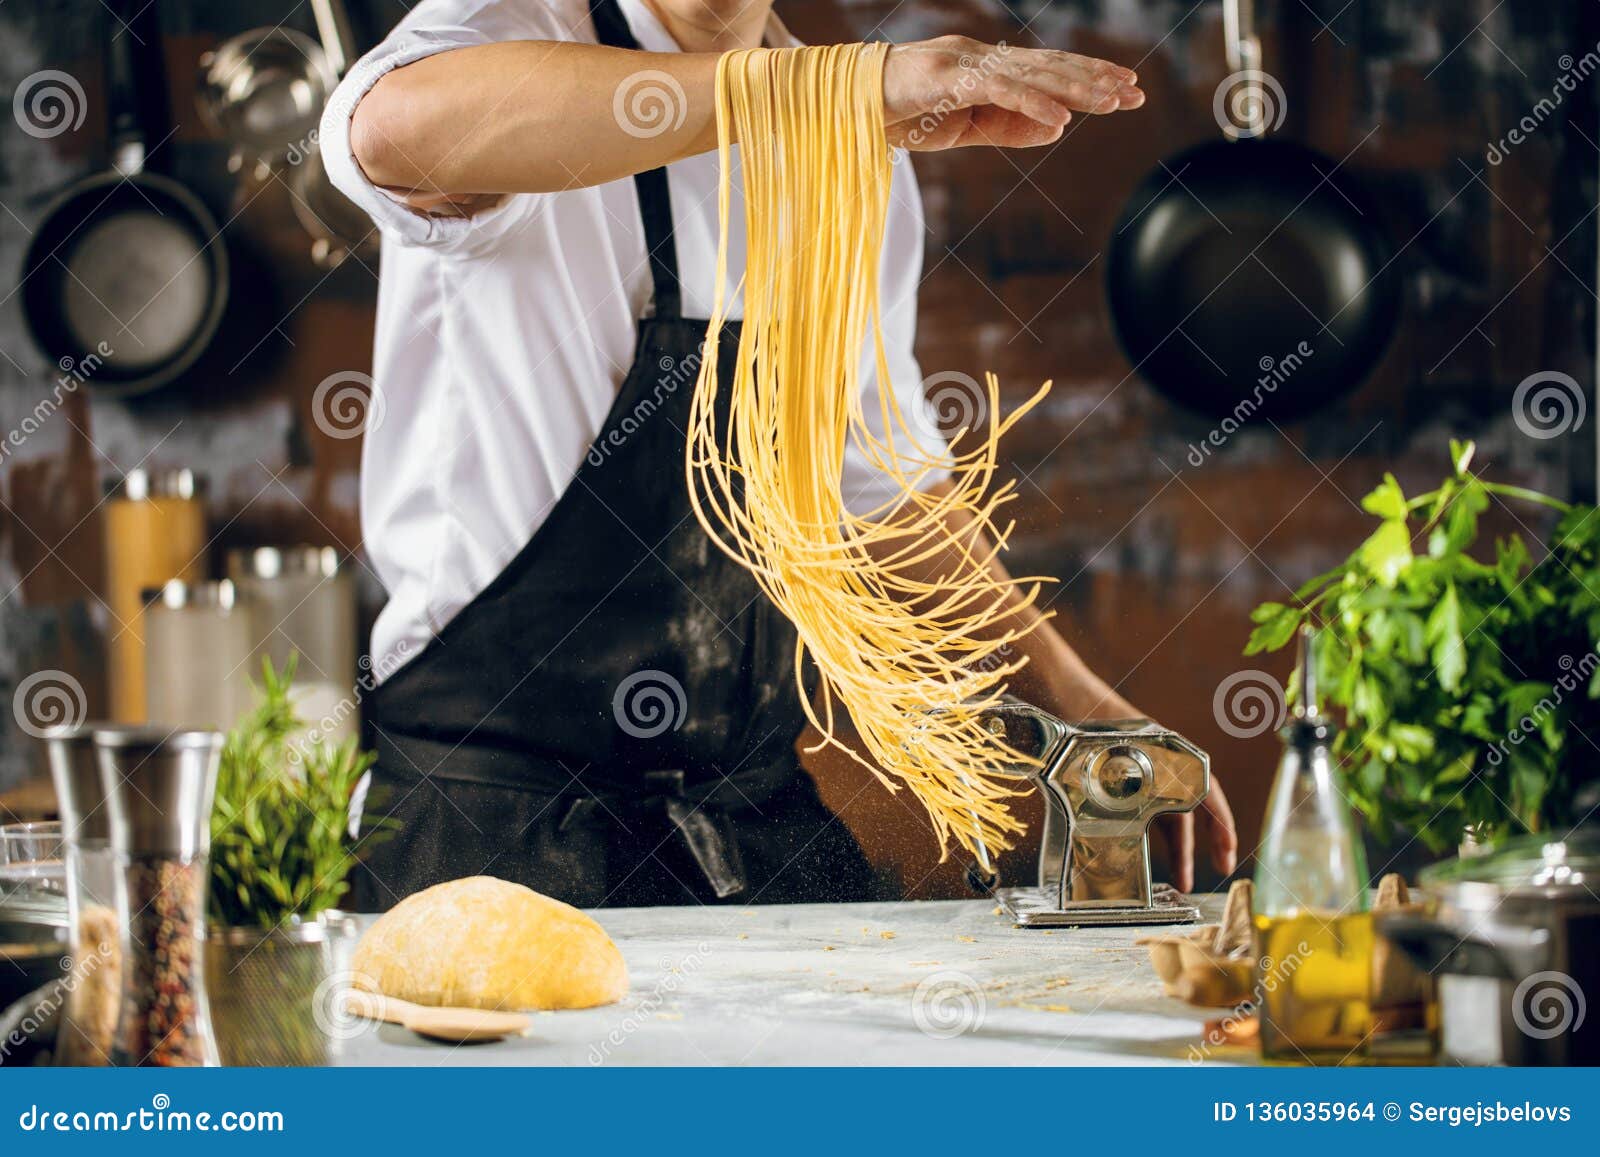 https://thumbs.dreamstime.com/z/chef-making-spaghetti-noodles-pasta-machine-kitchen-table-some-ingredients-around-136035964.jpg